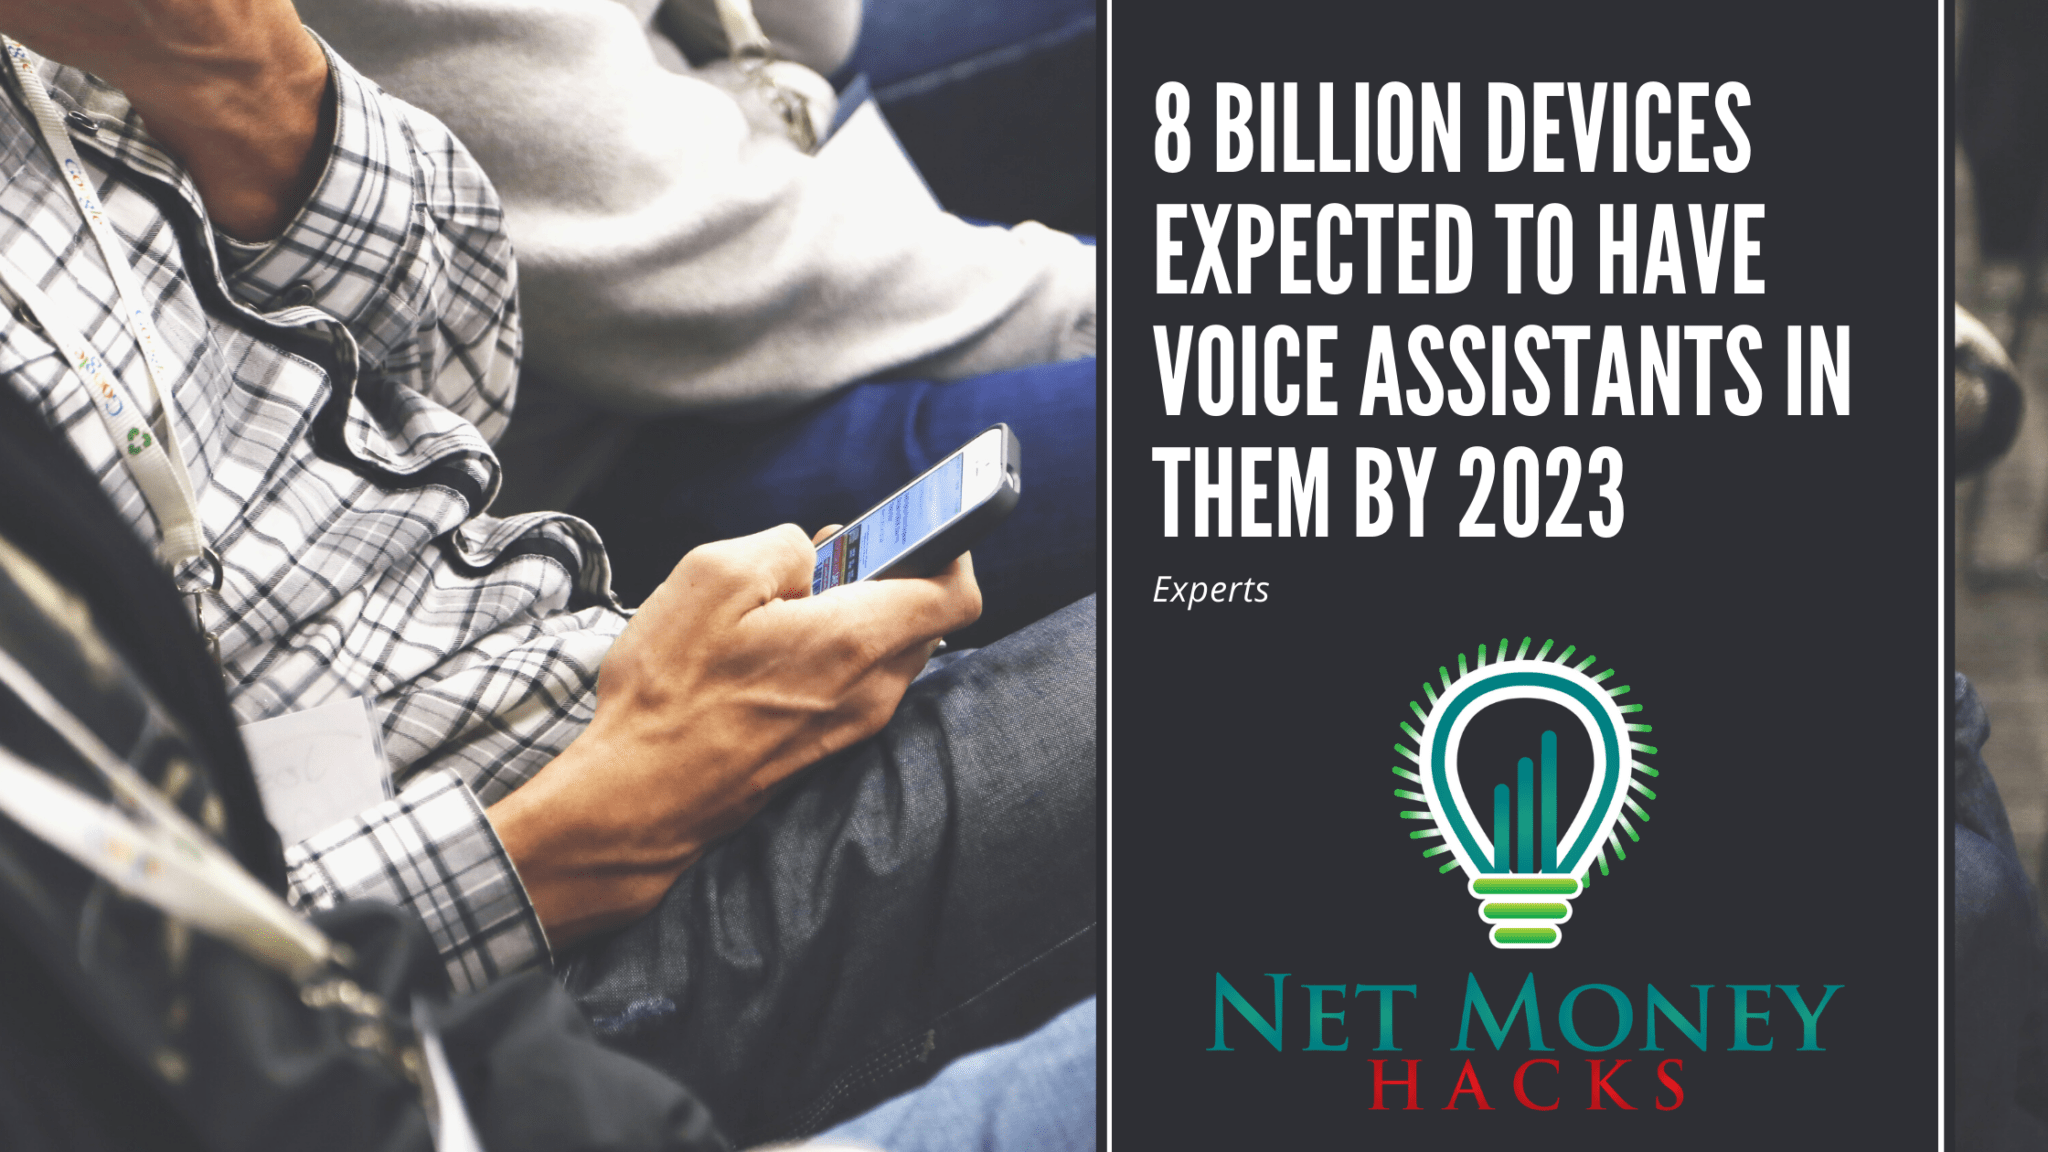 Banner showing someone with a handheld mobile device illustrating the expected growth of mobile devices with voice assistants installed by 2023 expected to reach 8 billion